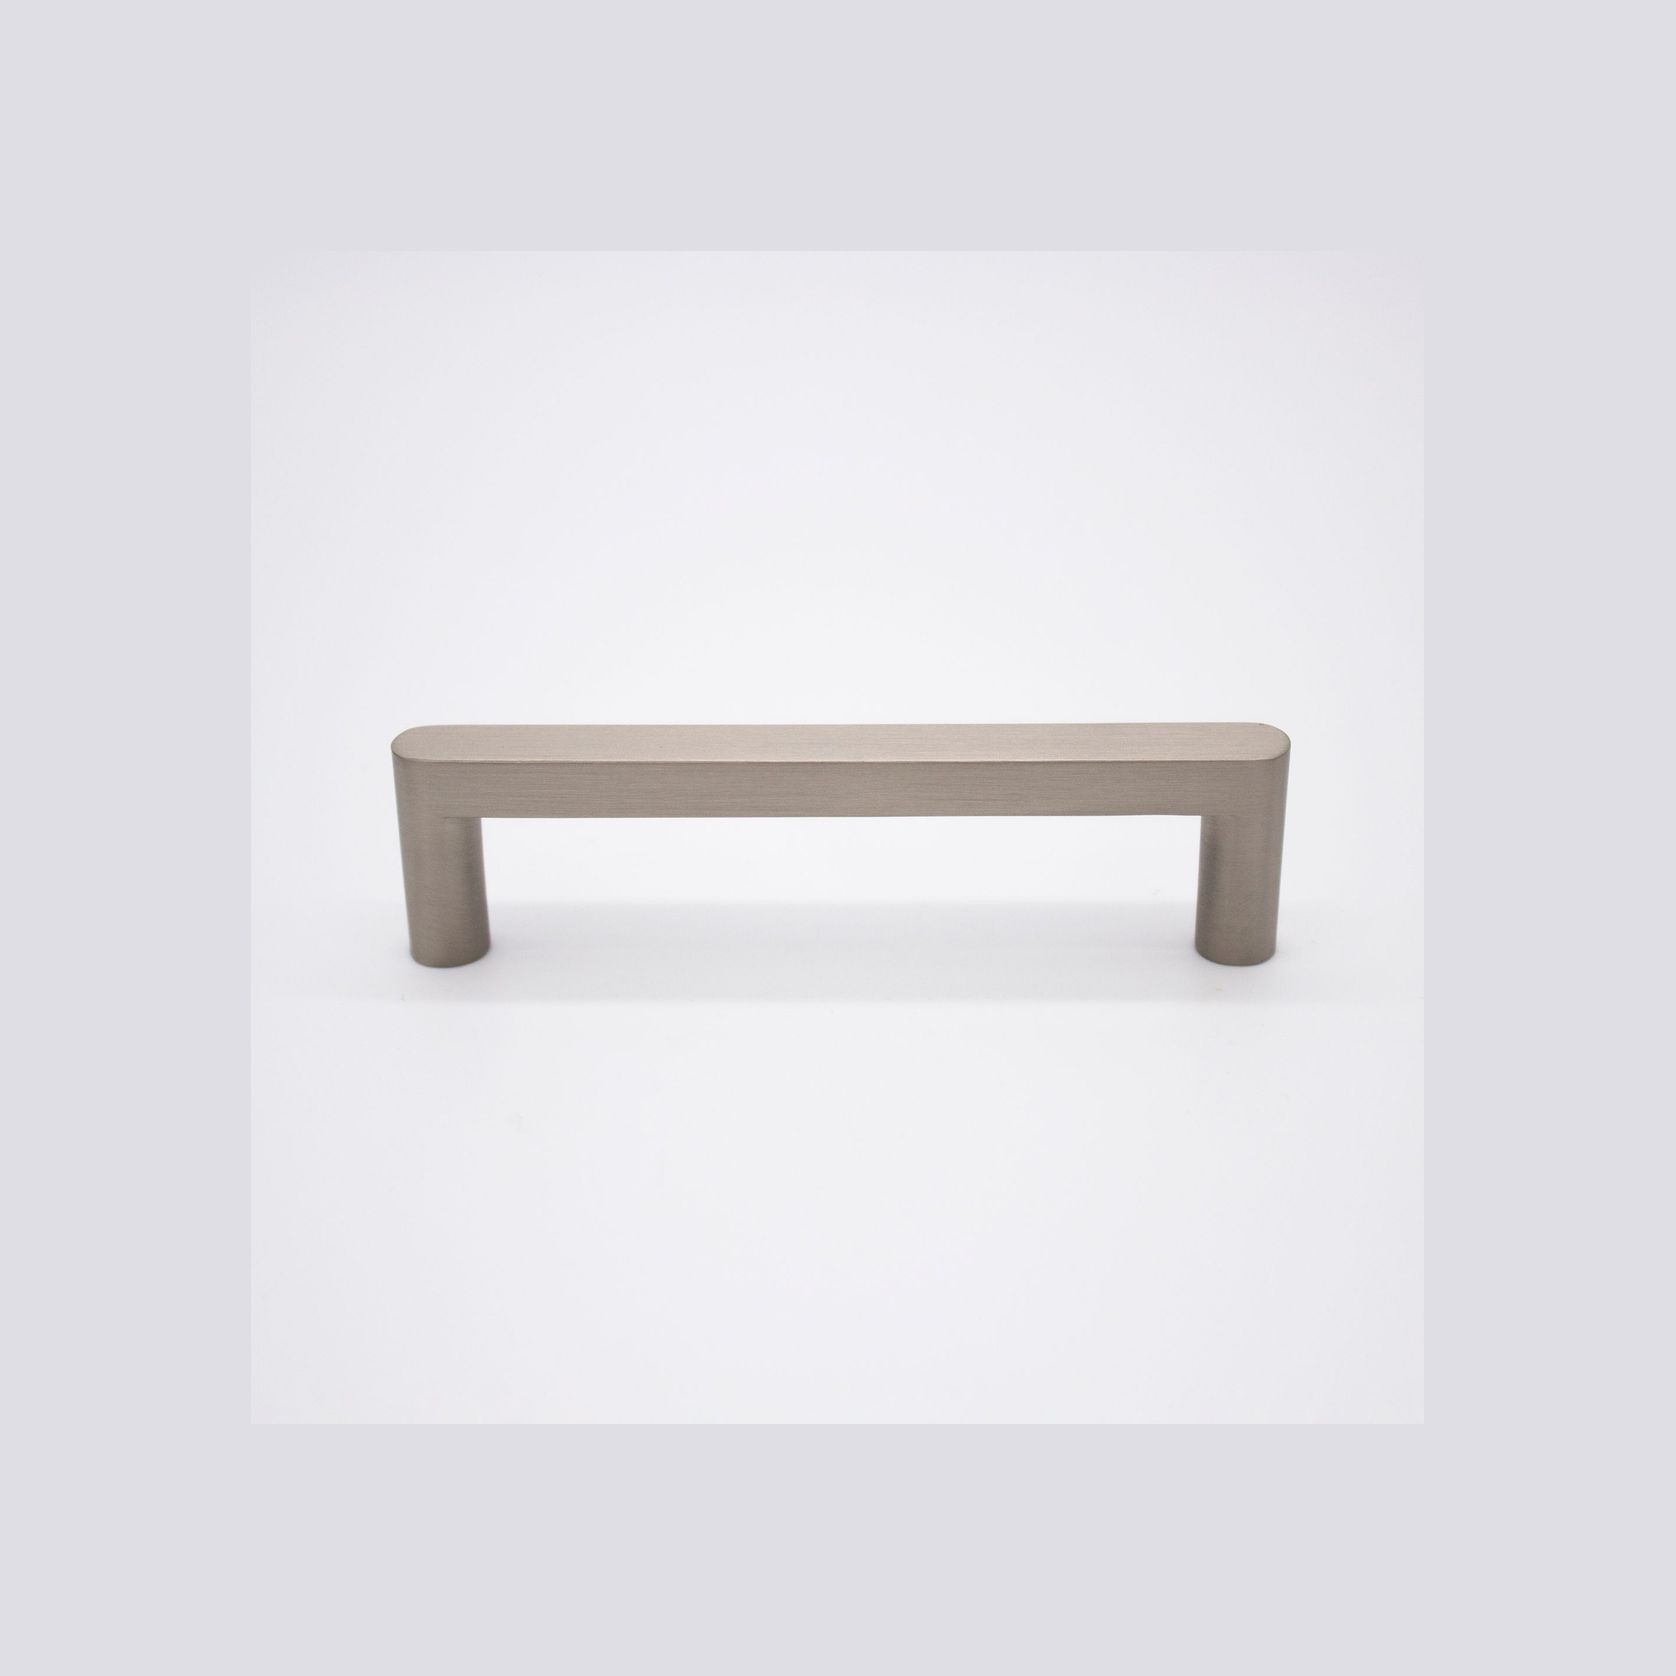 Brushed Nickel Straight Profile Cabinet Pull - Clio gallery detail image